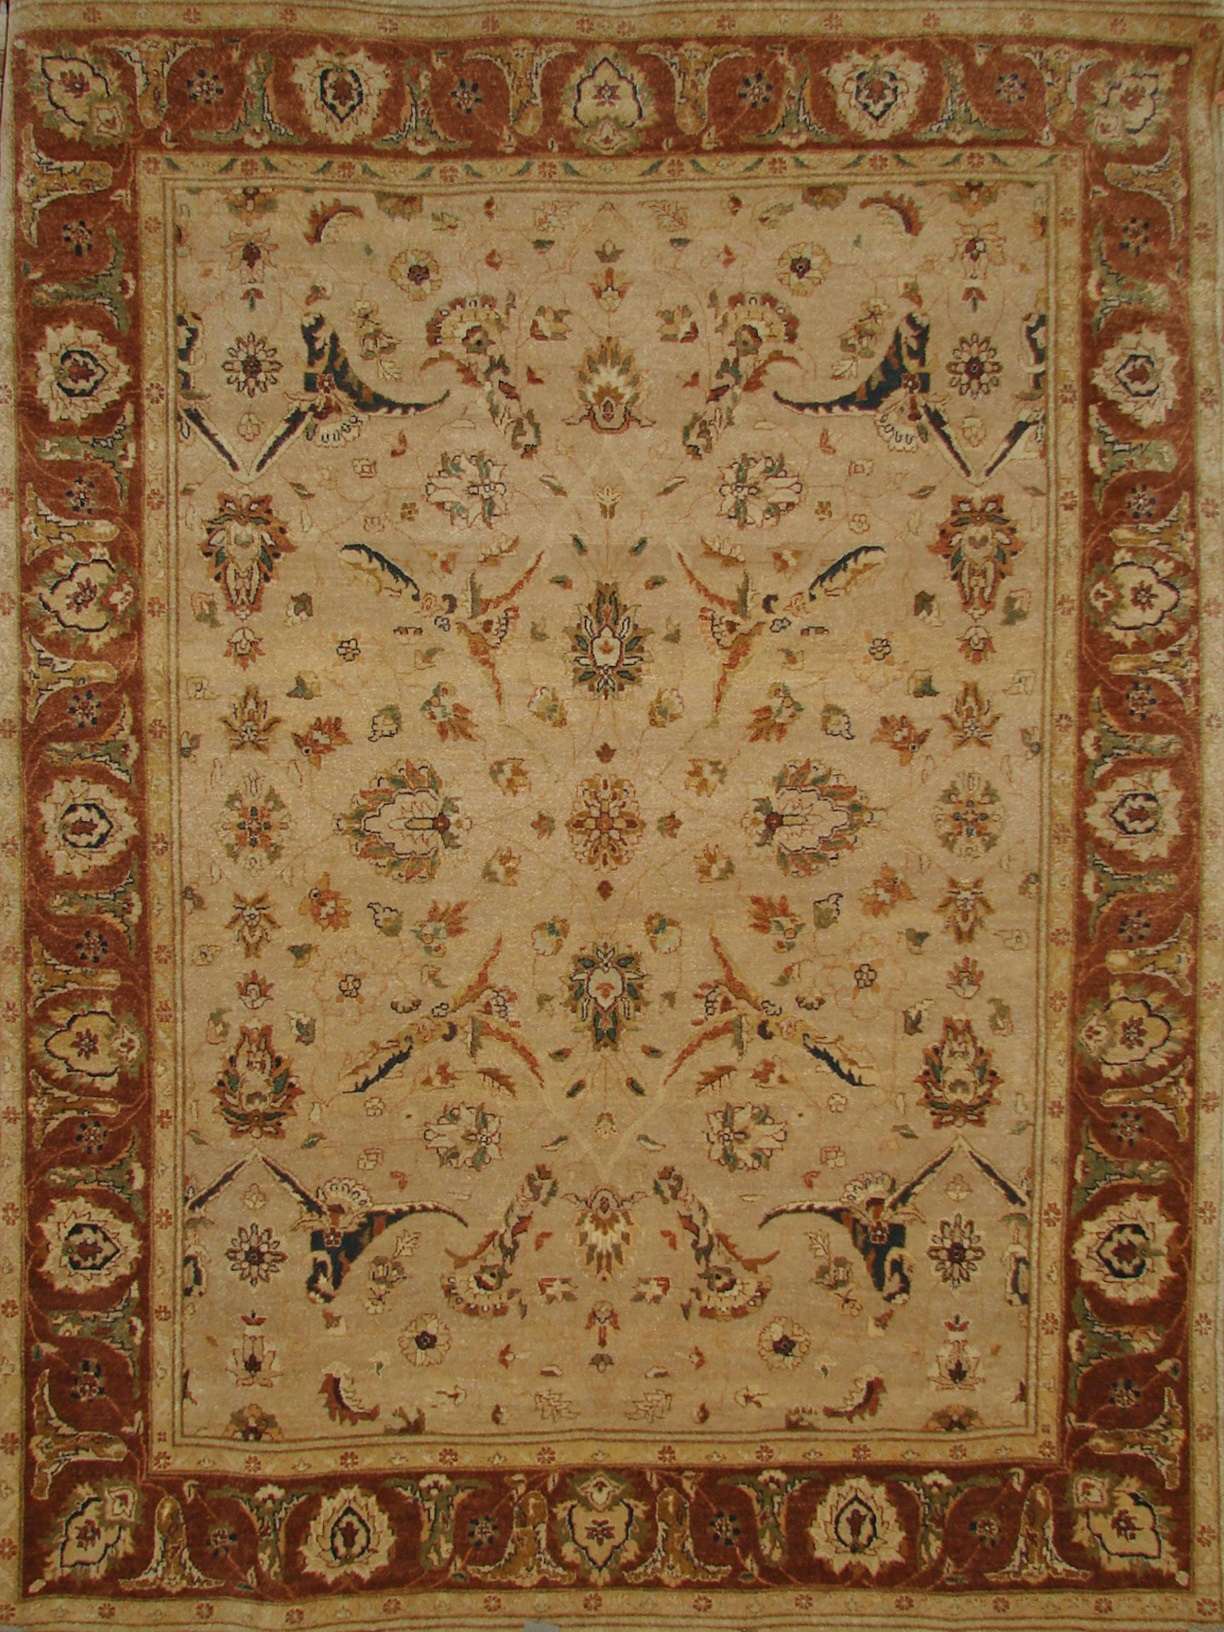 Clearance & Discount Rugs Sultan-Bidjar H 02661 Camel - Taupe & Rust - Orange Hand Knotted Rug